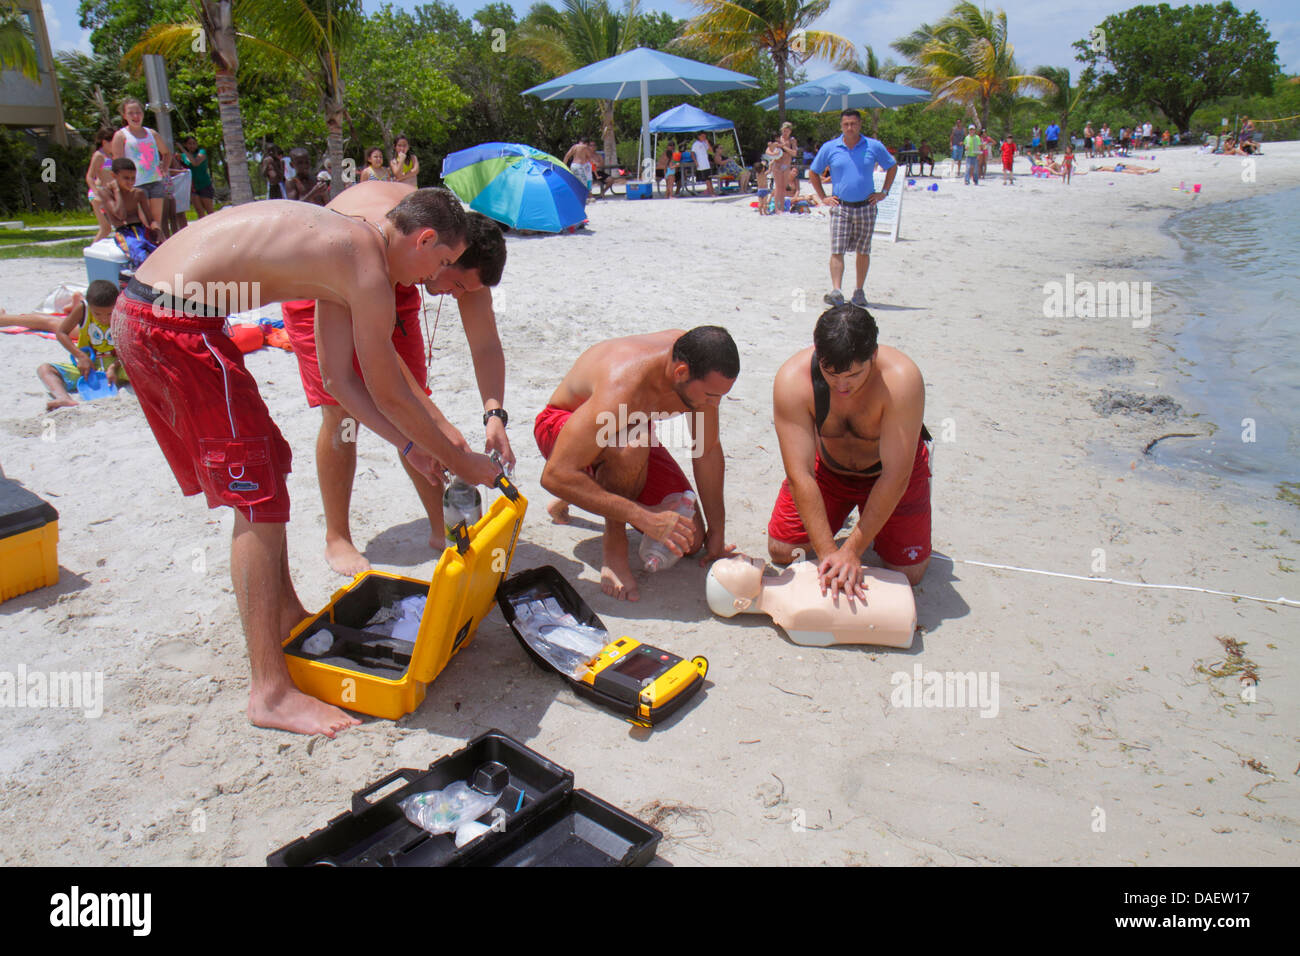 Miami Florida,Homestead,Homestead Bayfront Park,Biscayne Bay,lifeguards,lifeguard training,rescue,man men male adult adults,CPR dummy,mannequin,FL1305 Stock Photo